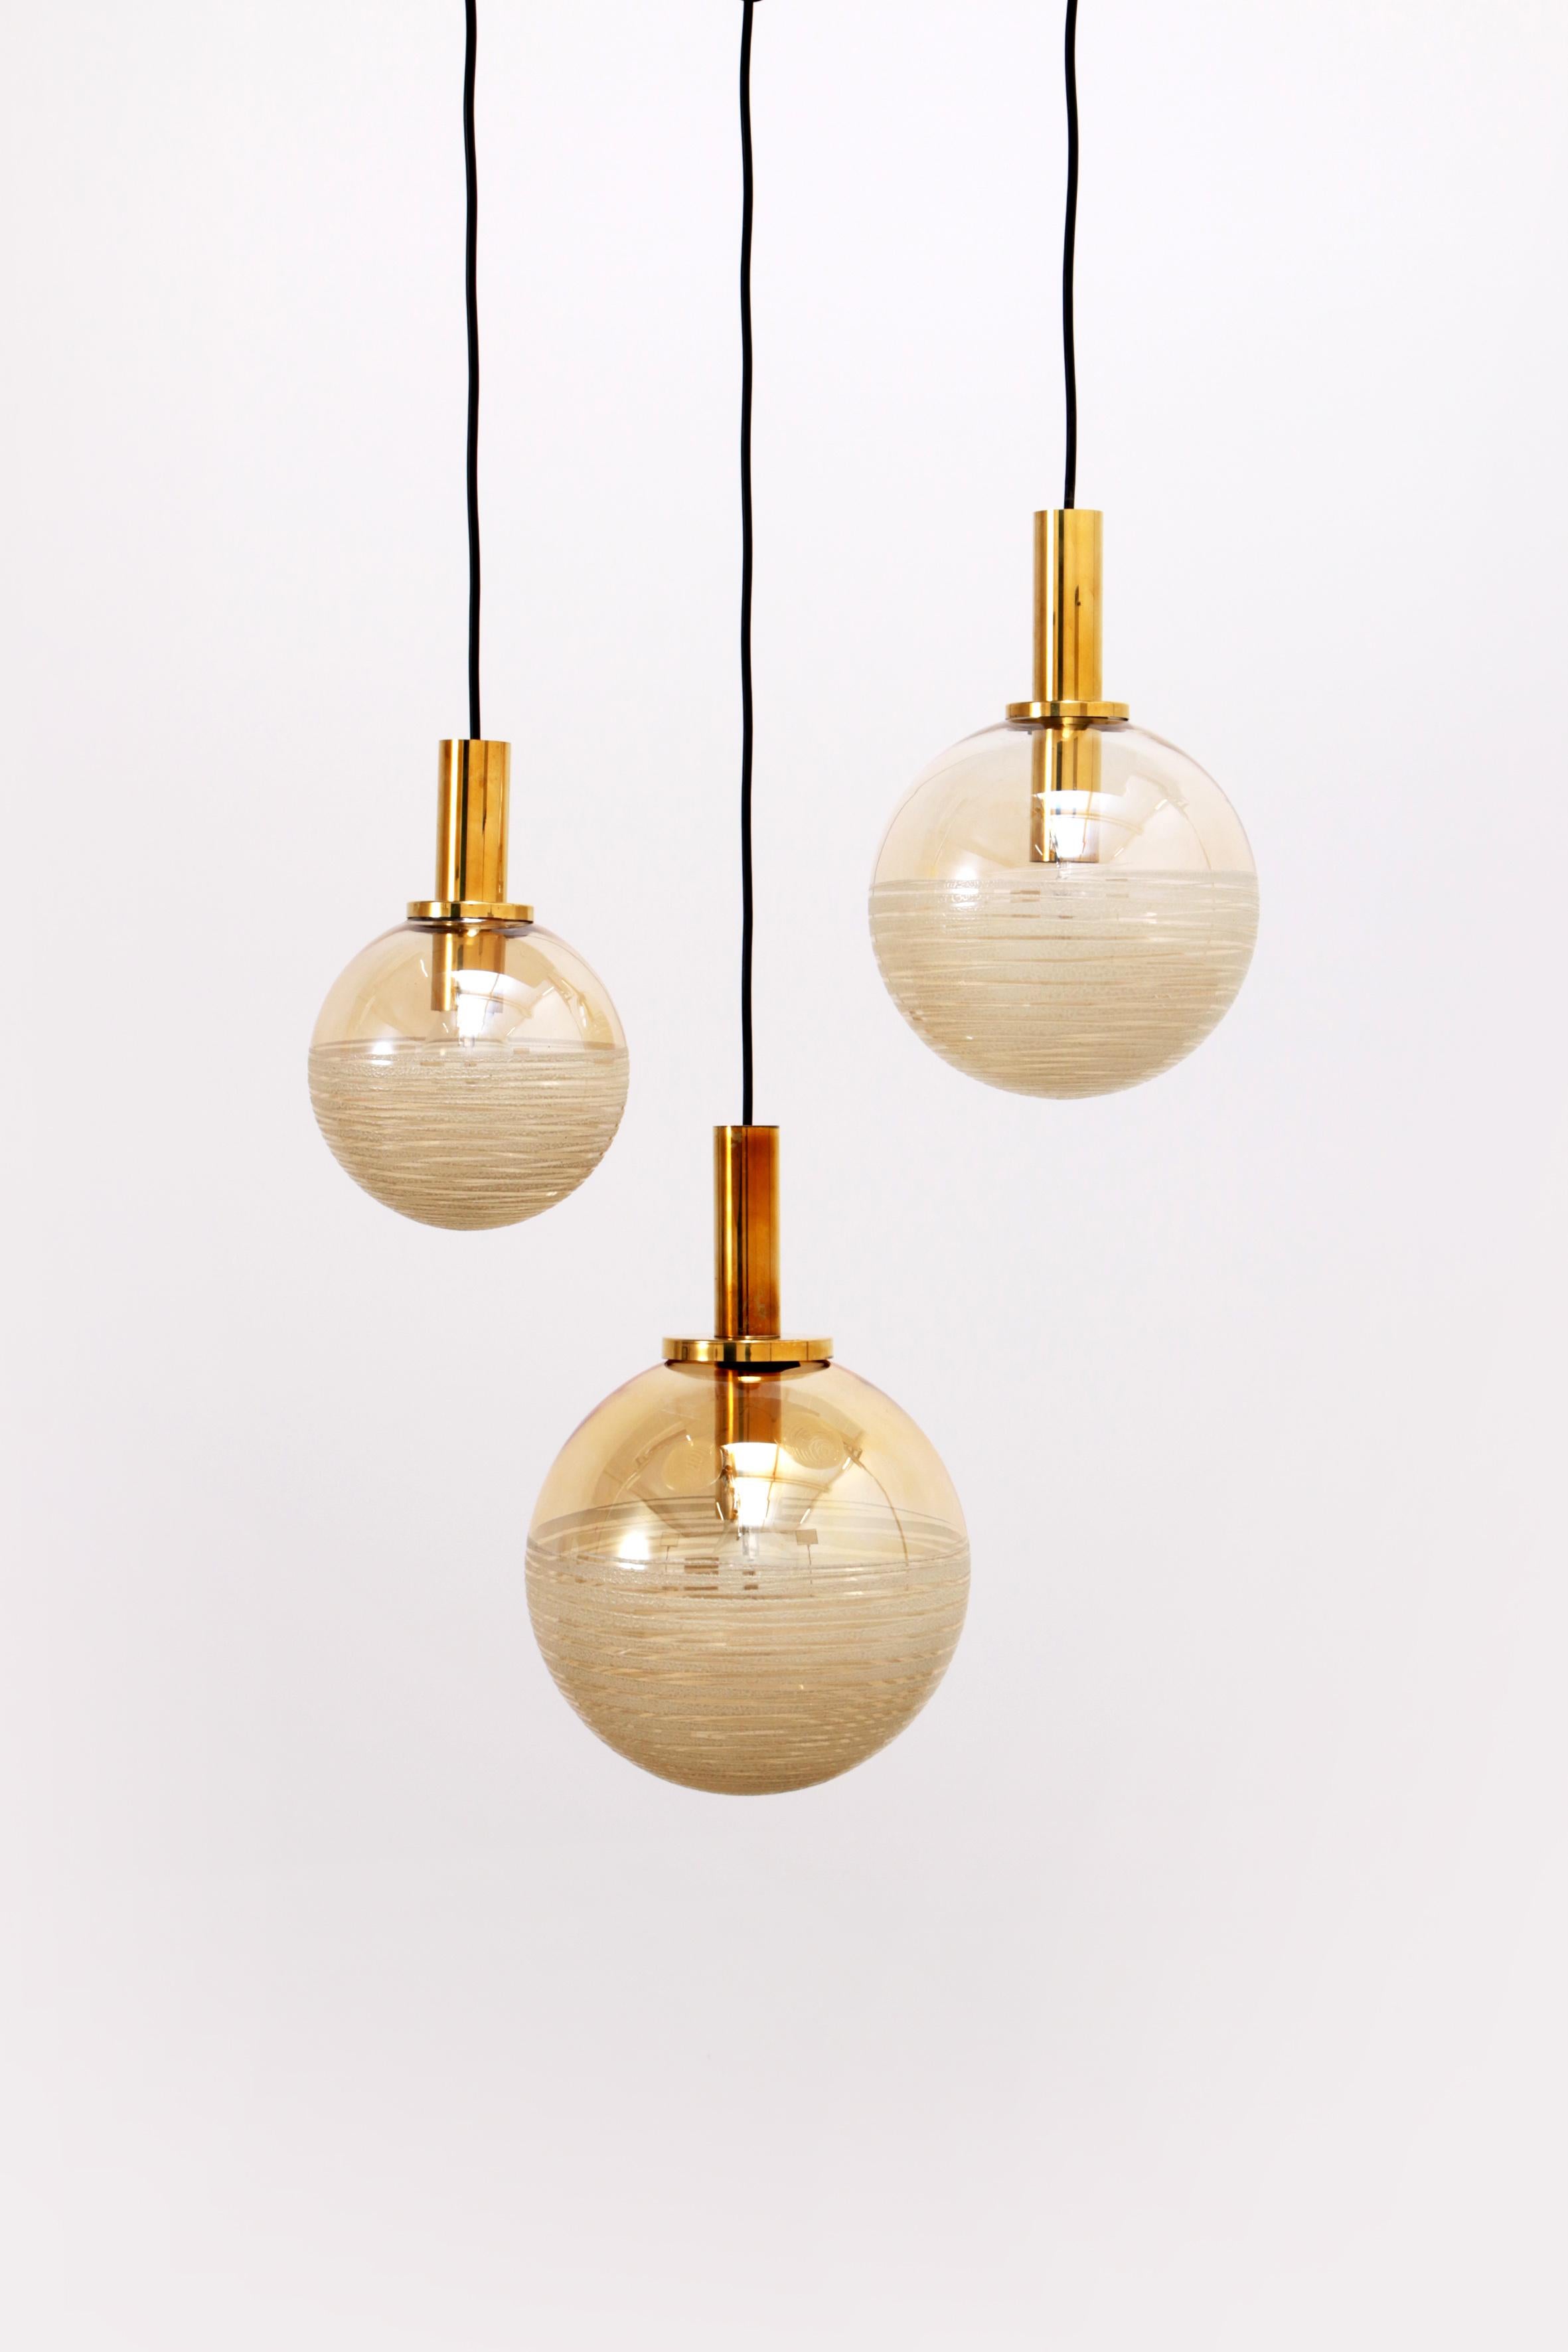 Vintage Set of three Glashutte Limburg hanging lamps, 1960s Germany.


These are three beautiful ball lamps with a beautiful amber color glass bulb. The bulbs have three different sizes and are beautiful as a set. Beautiful for your hall or above